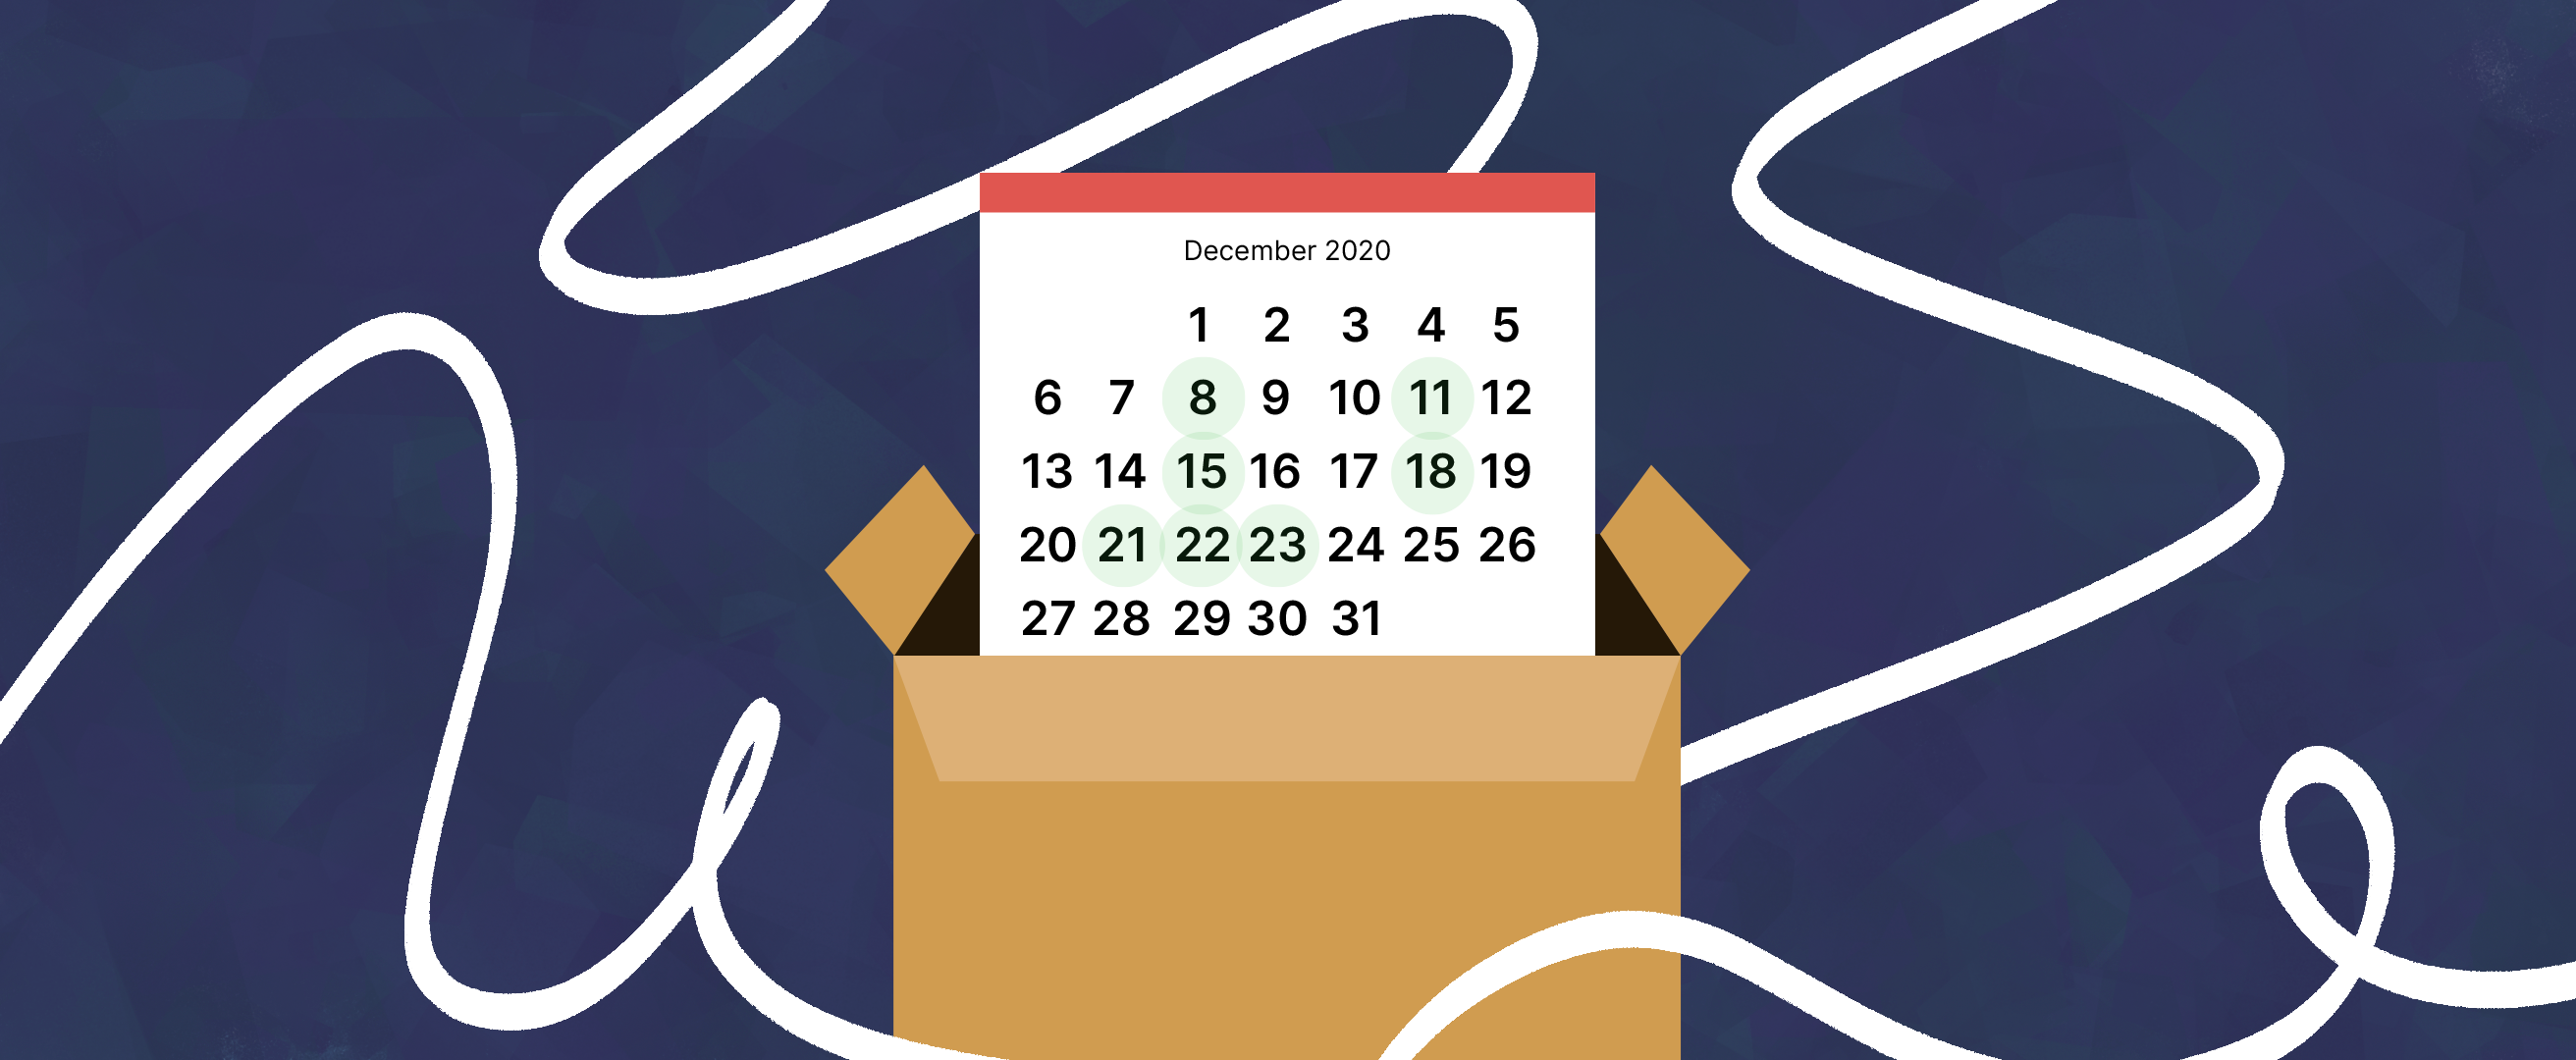 Ship-by Dates for 2020 Holiday Season